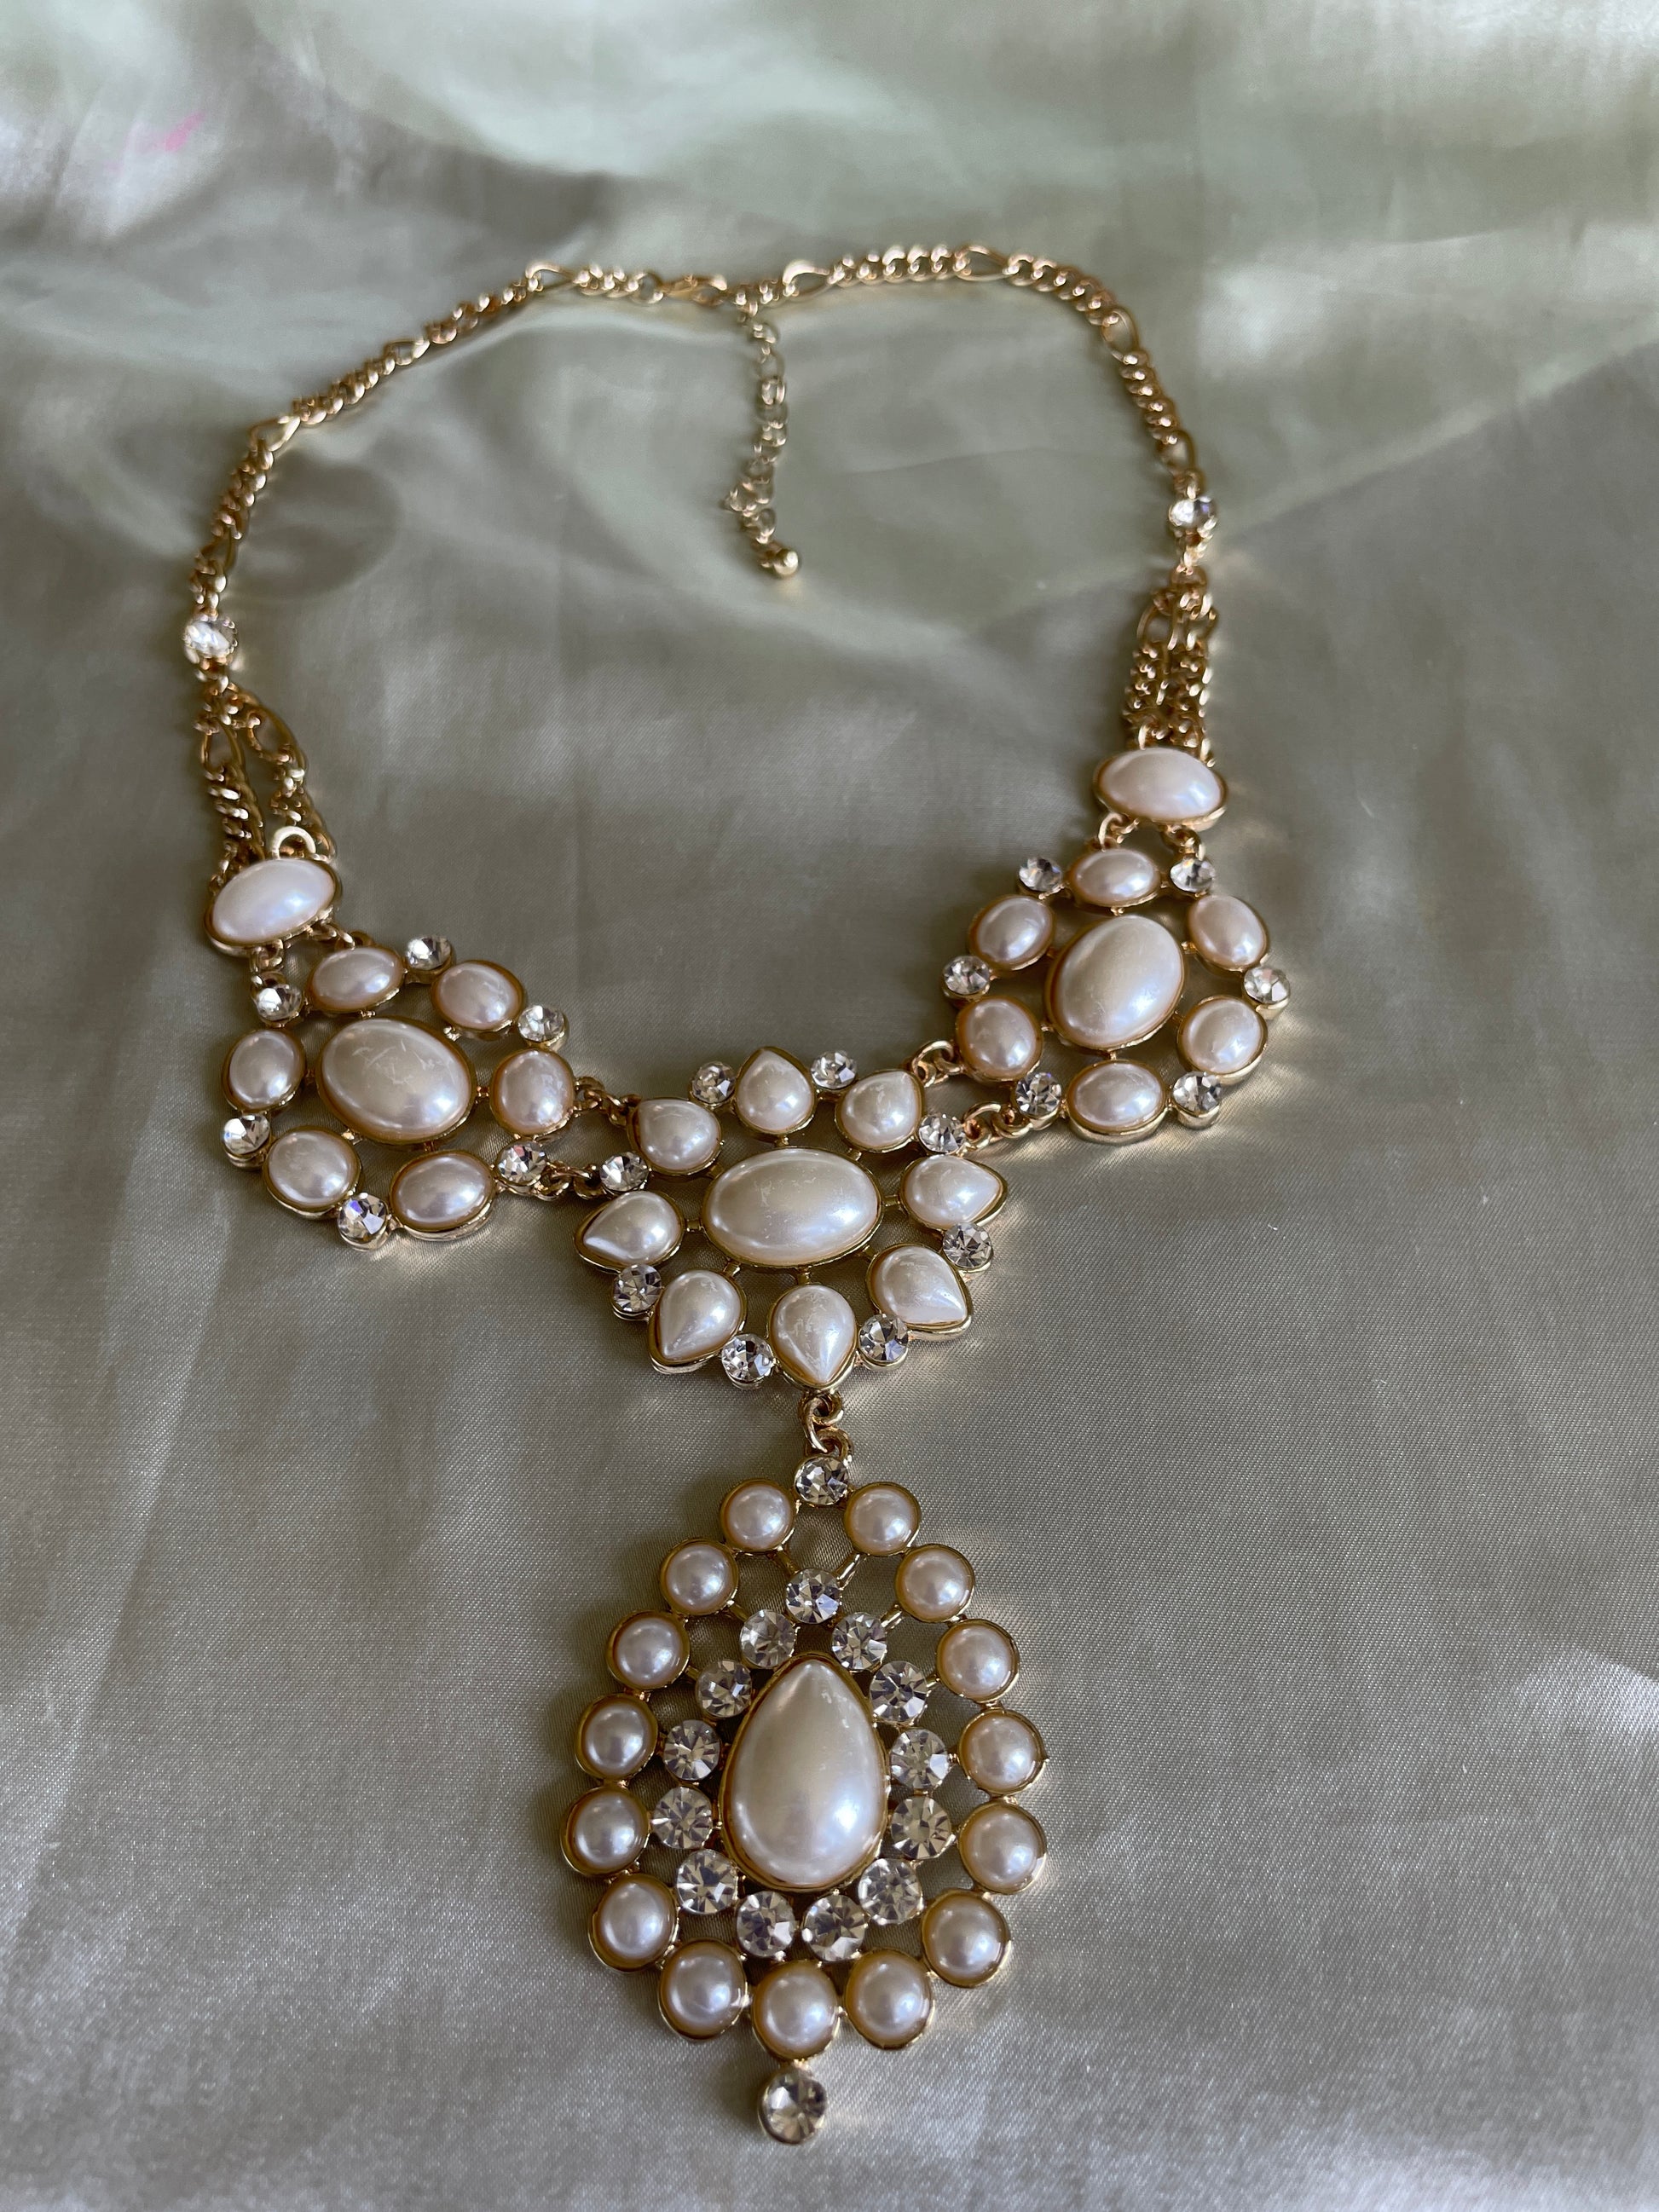  90s Beautifully Beaded Gold Tone Drop Pendant Statement Necklace